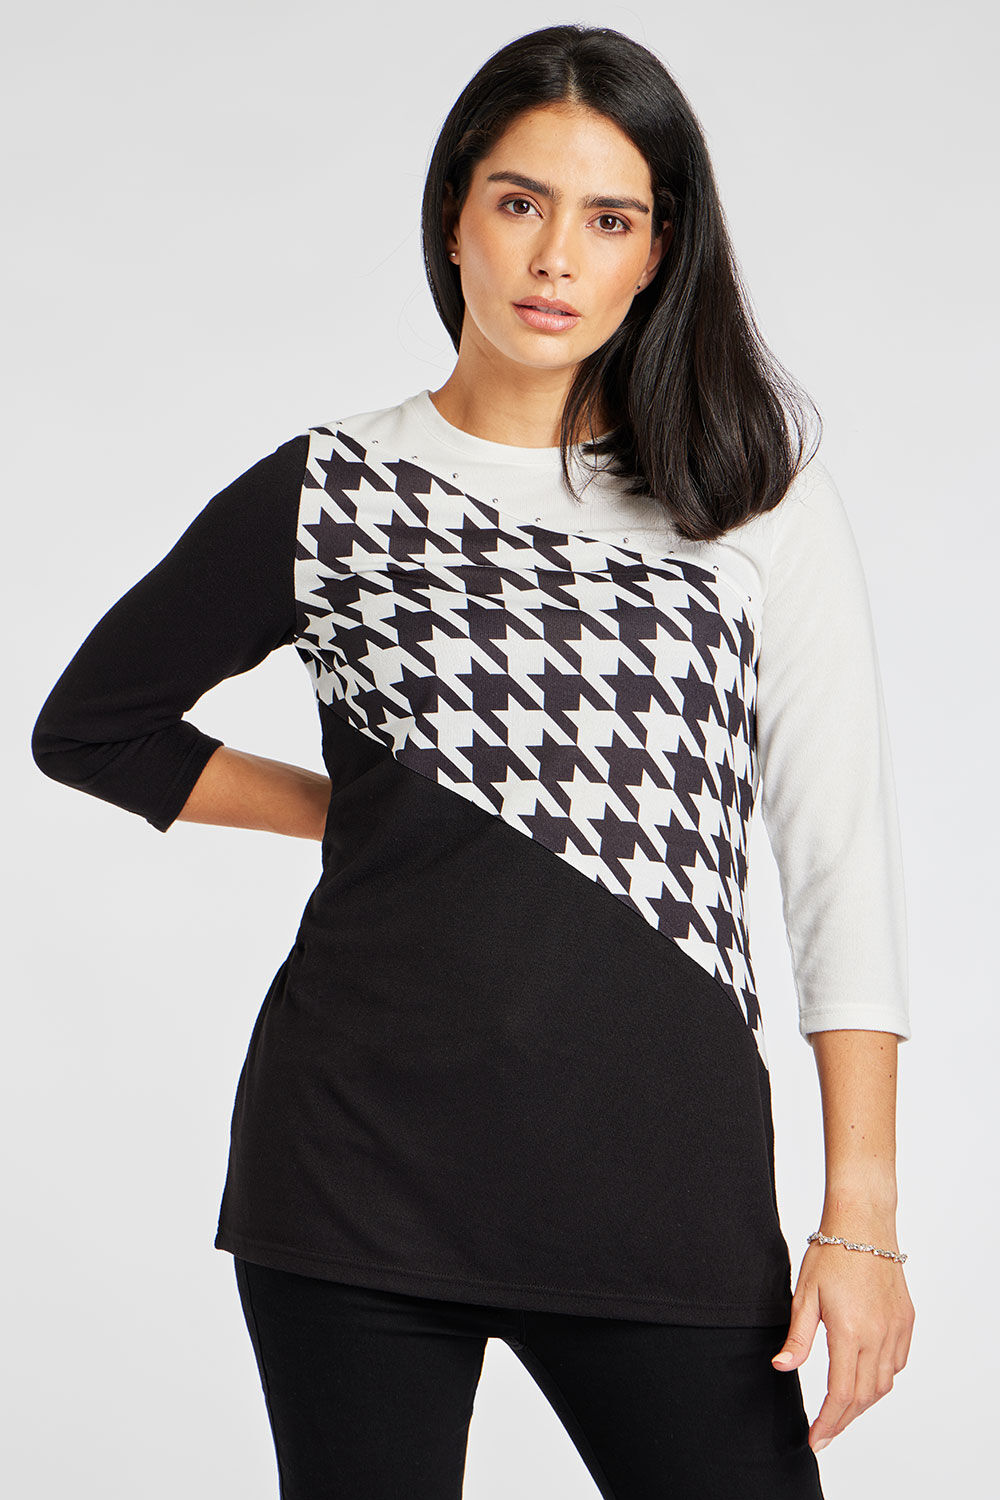 Bonmarche Black 3/4 Sleeve Dogtooth Print Soft Touch Tunic, Size: 10